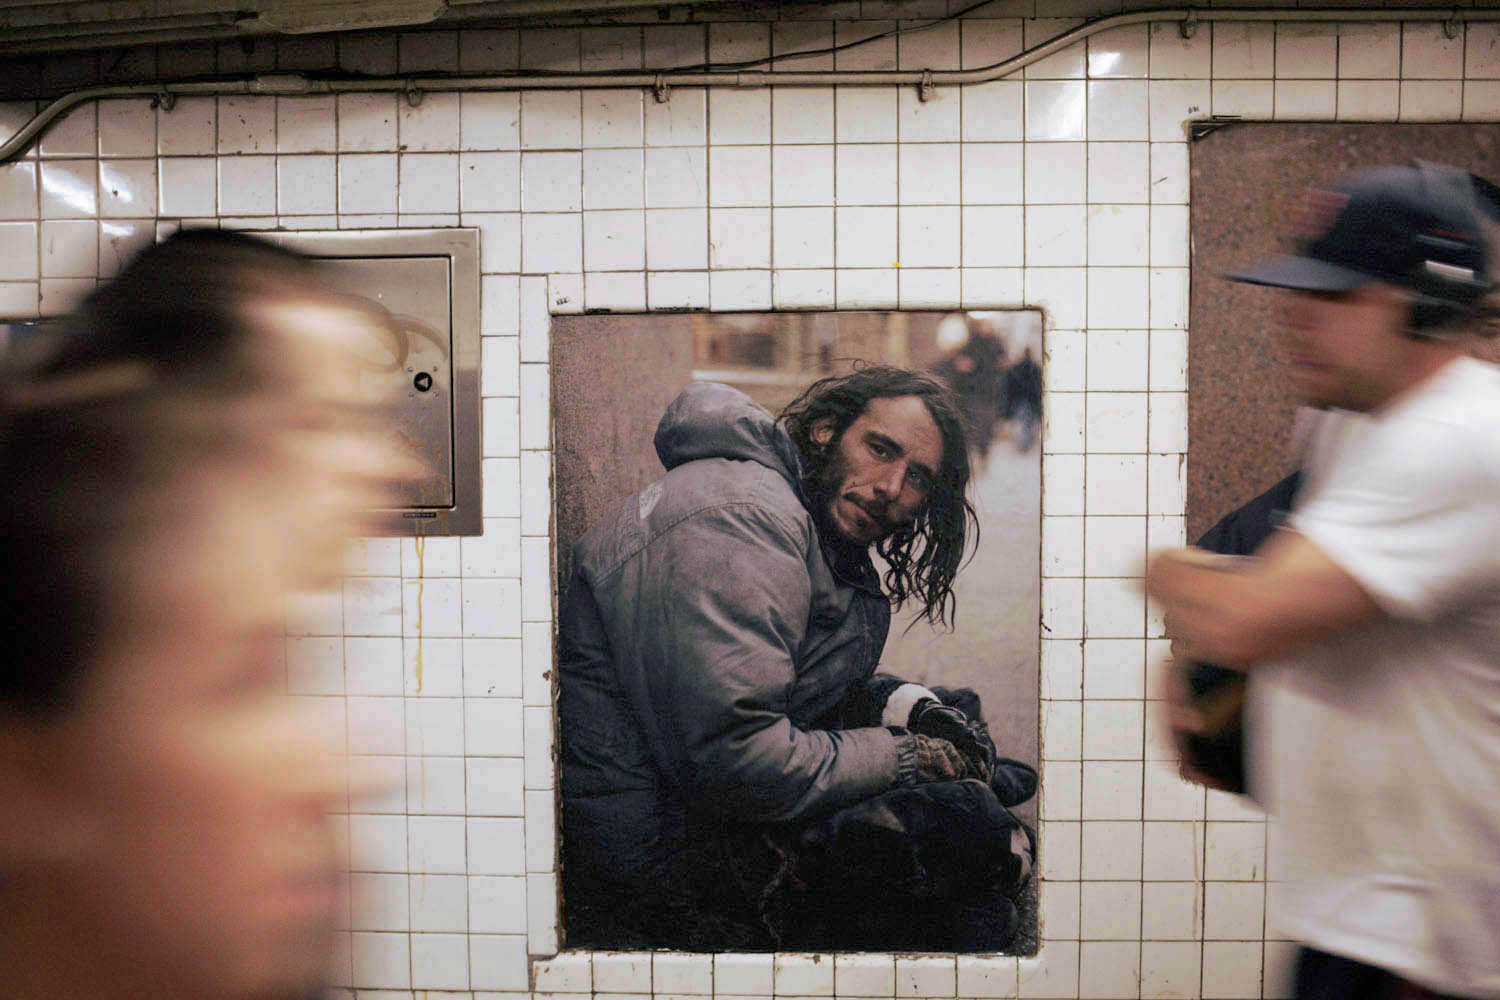 Artist, Andres Serrano's photographic installation, Residents of New York, at the West 4th Street subway  station in New York City.